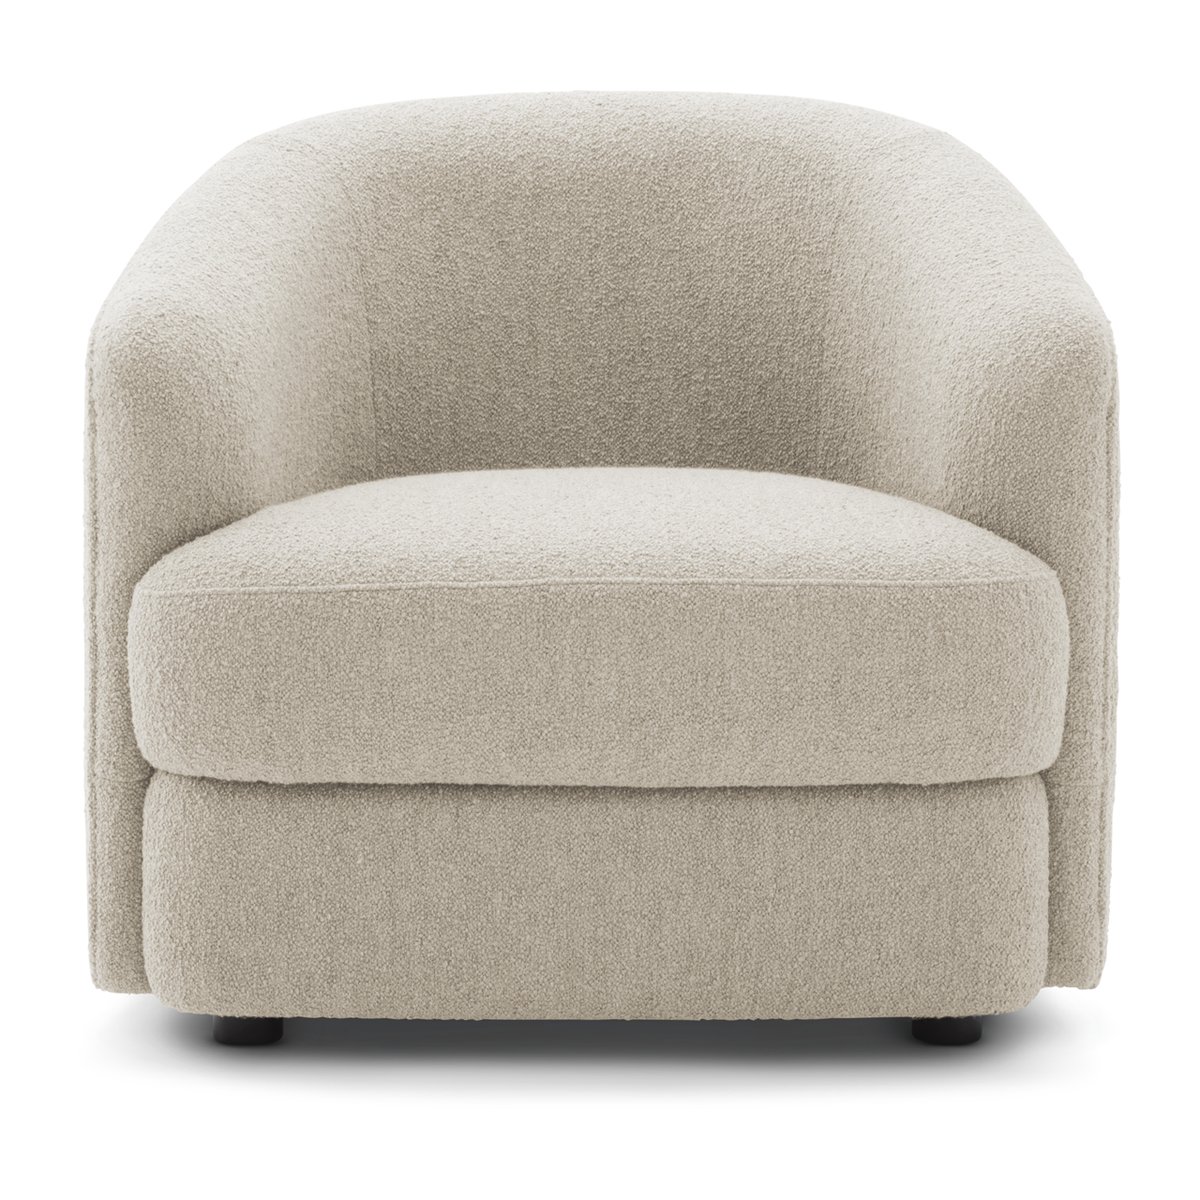 New Works Covent fauteuil Lana